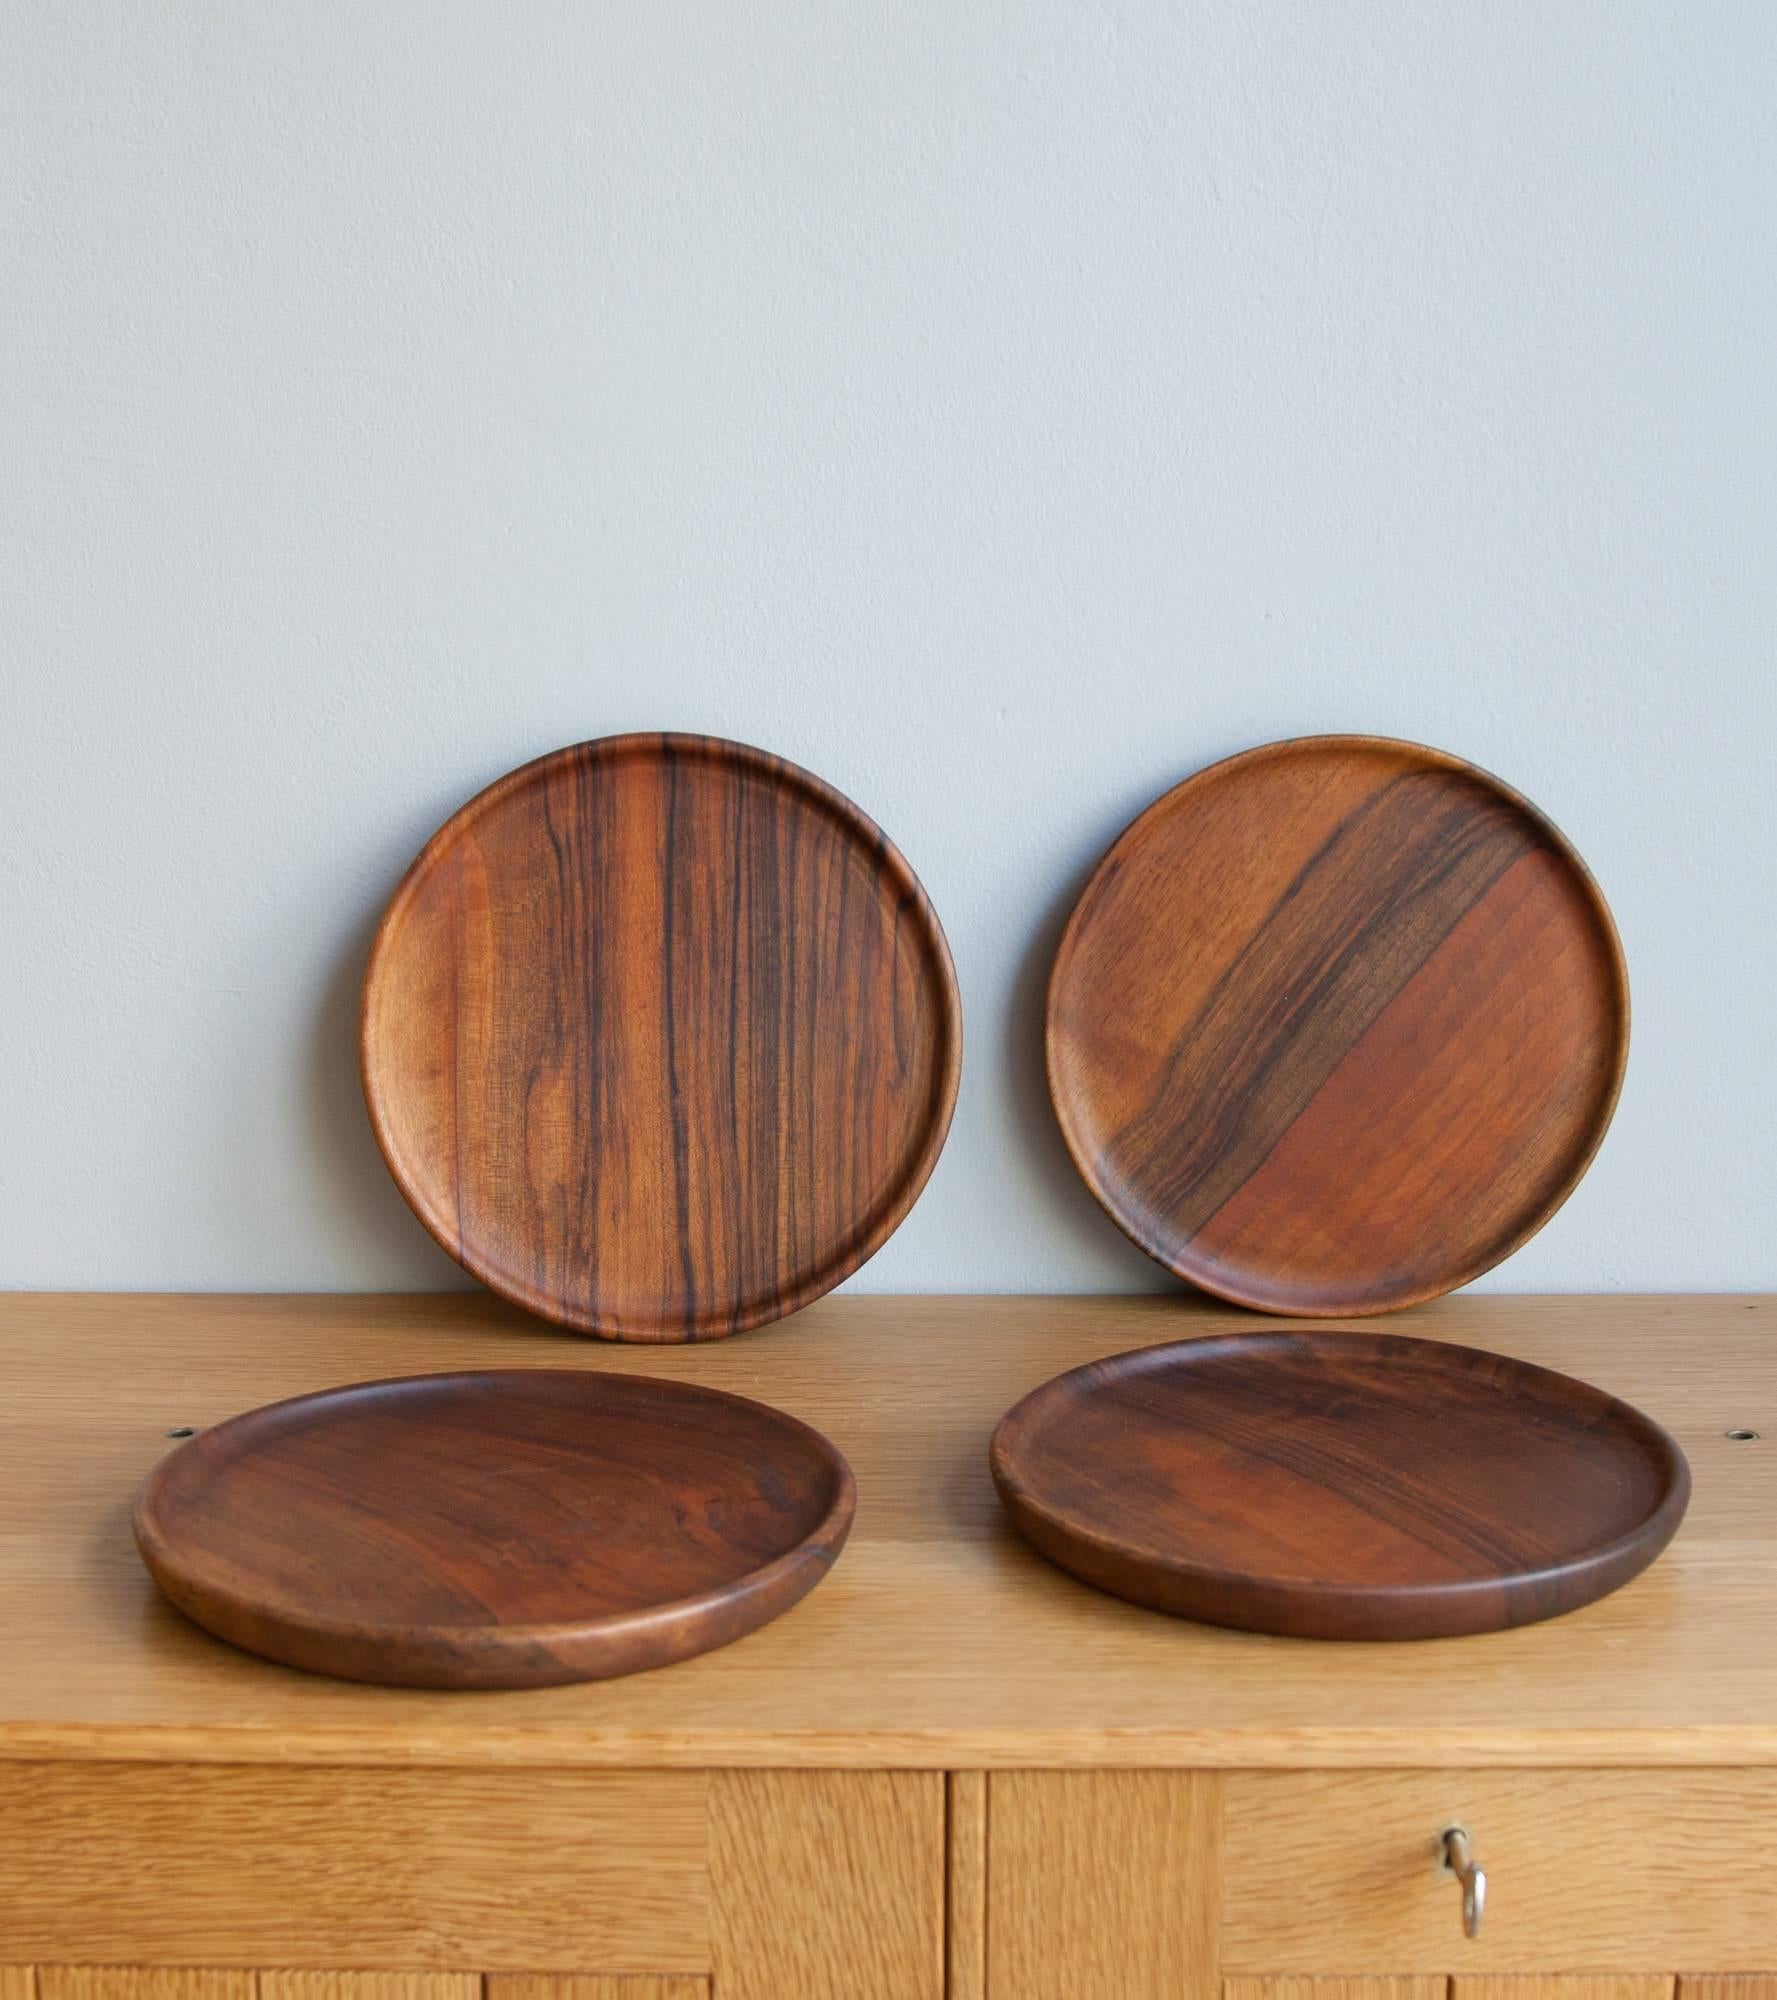 Vintage set of four wooden plates by the Auböck Werkstätte, Vienna, circa 1970.
Minimal in shape, each plate is hand-carved out of walnut has a shallow lip and a circular cavity on the underside. One of four bears the 'Auböck' mark.
With signs of